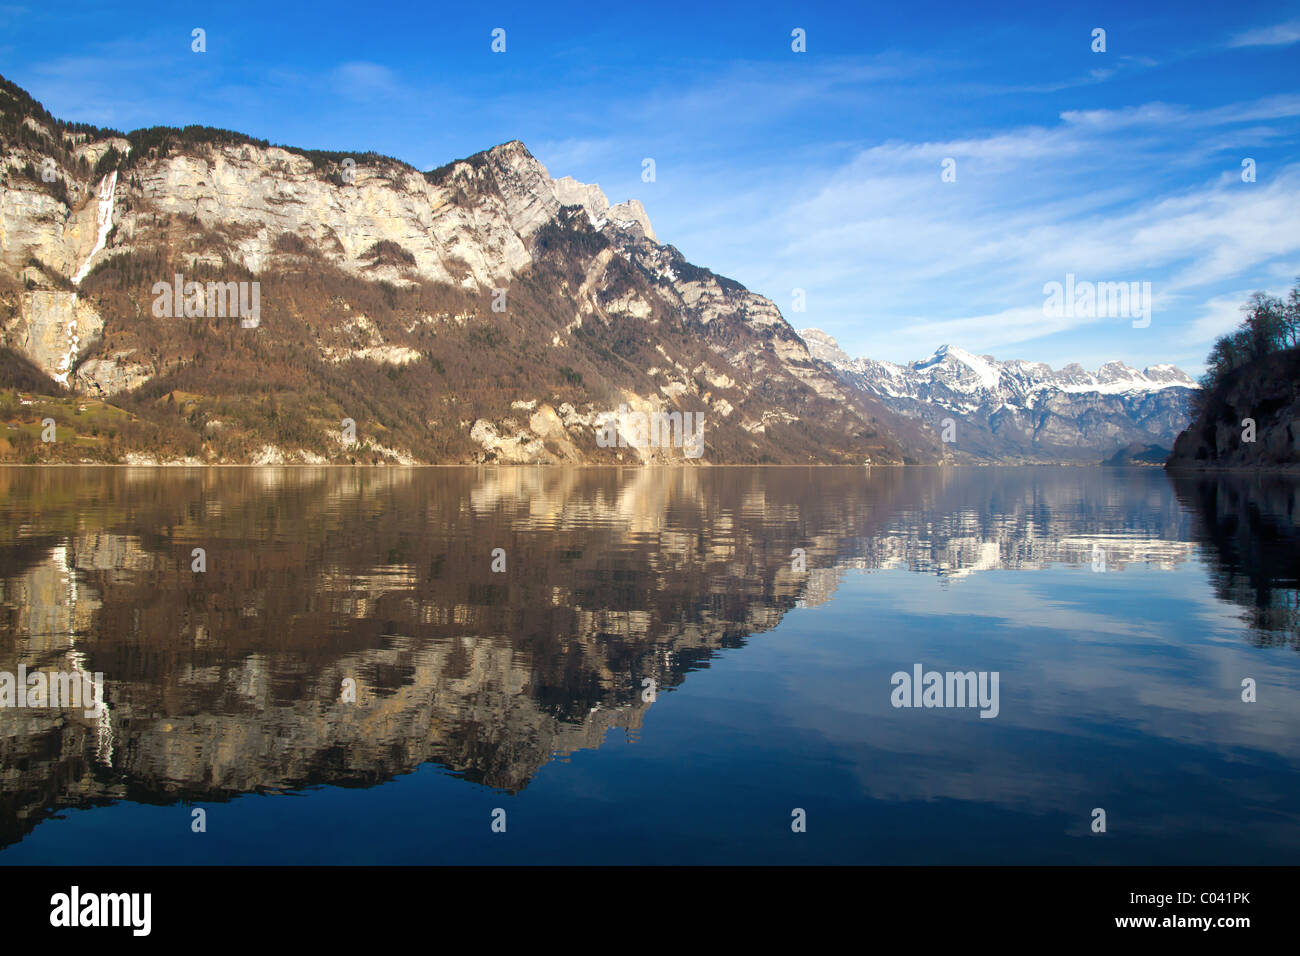 Switzerland - Walensee lake nr St. Gallen. Taken with Canon 7D and Sigma 17-50mm f2.8 Lens Stock Photo